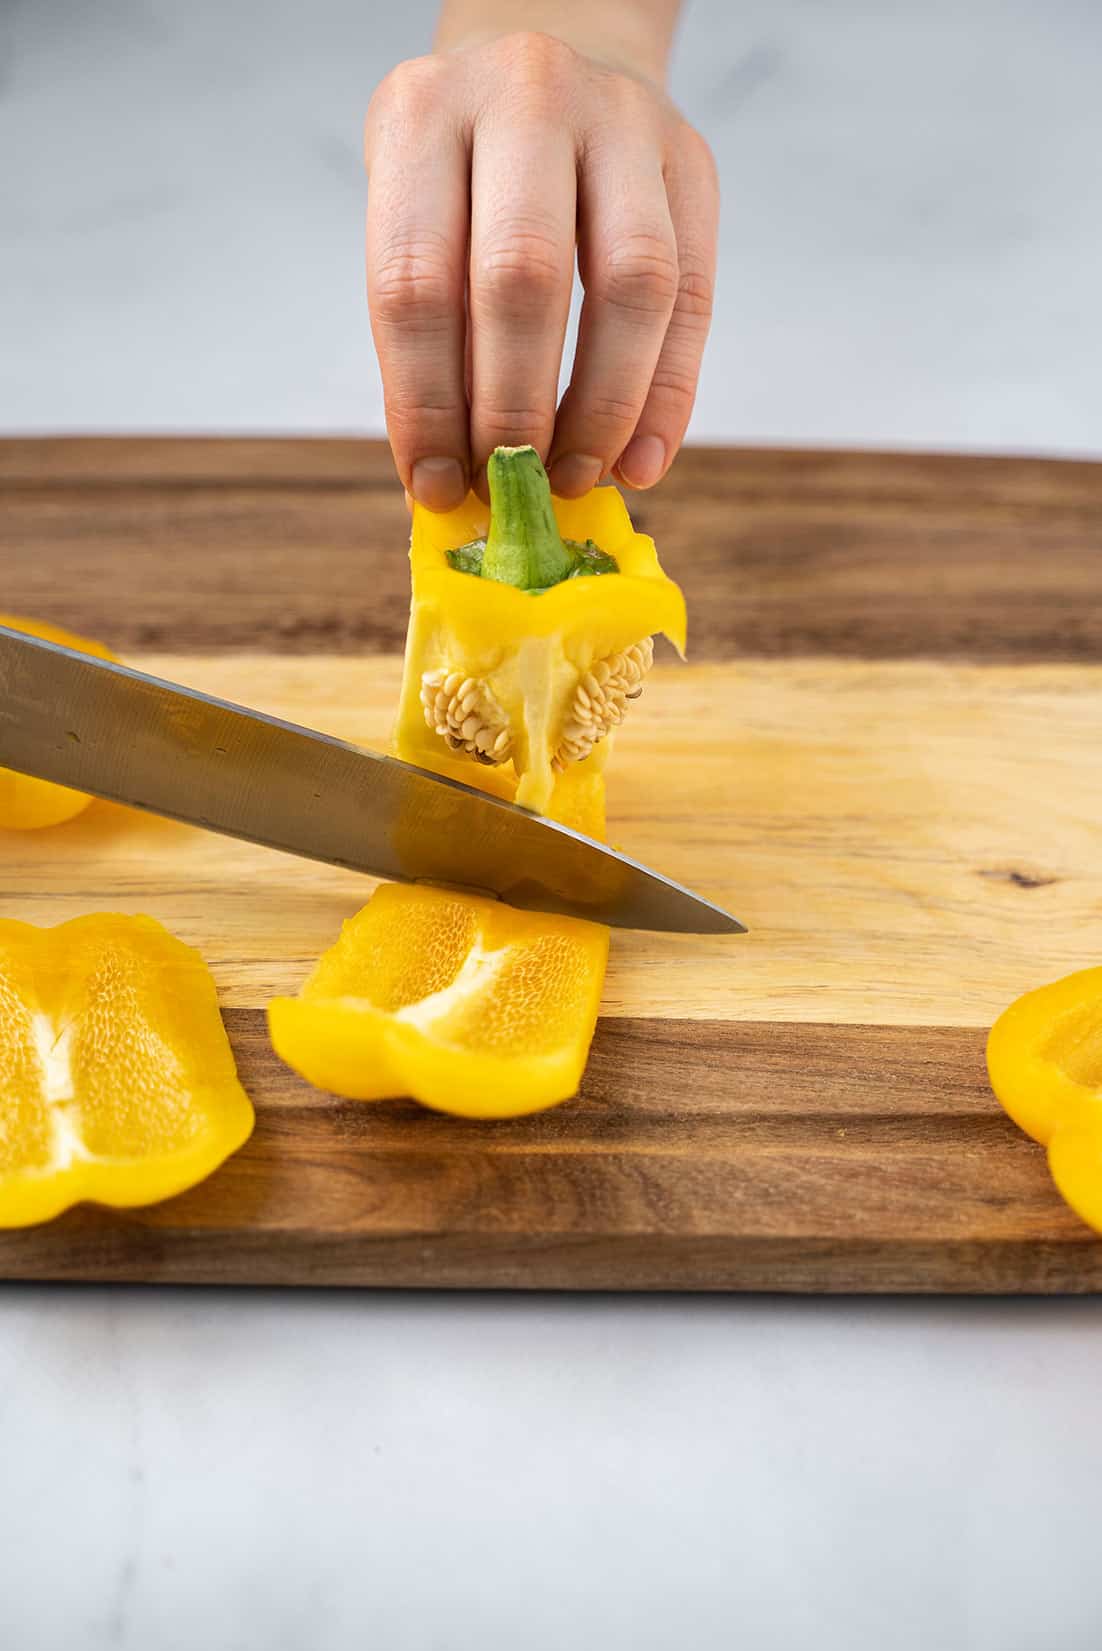 slicing the side of the bell pepper